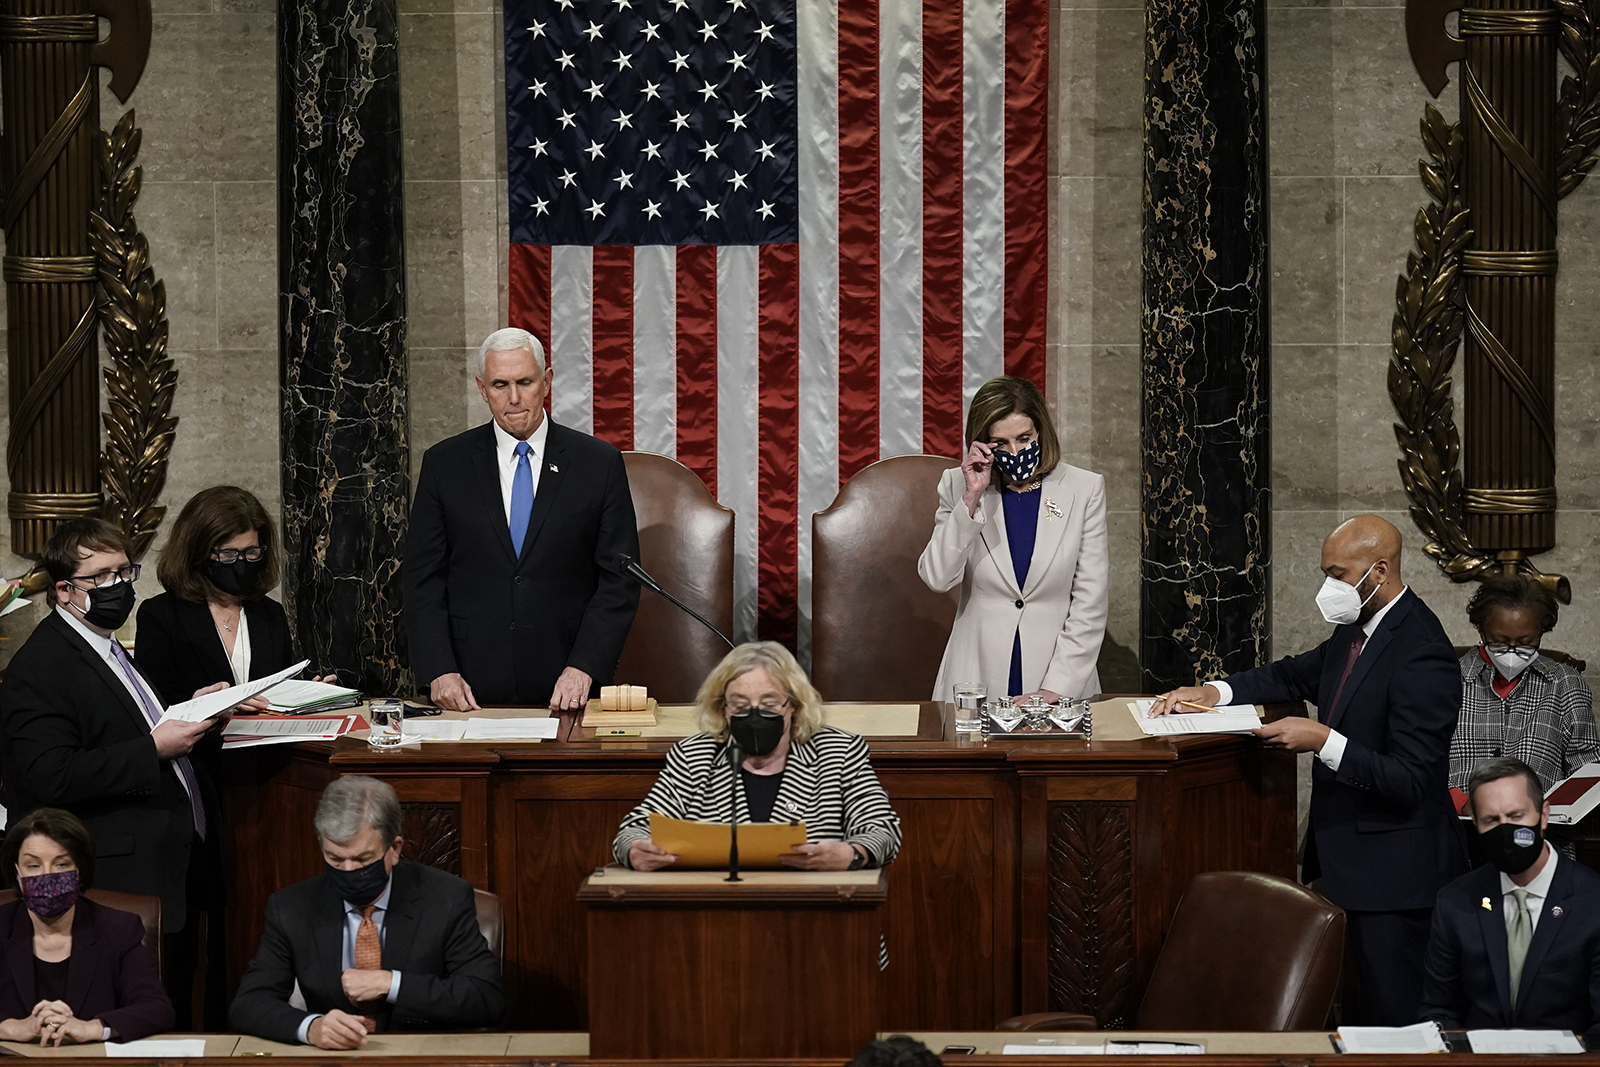 Vice President Mike Pence, left, and Speaker of the House Nancy Pelosi, D-Calif., right, read the final certification of Electoral College votes cast in November's presidential election during a joint session of Congress after working through the night, at the Capitol in Washington, Jan. 7, 2021. (AP Photo/J. Scott Applewhite, Pool)